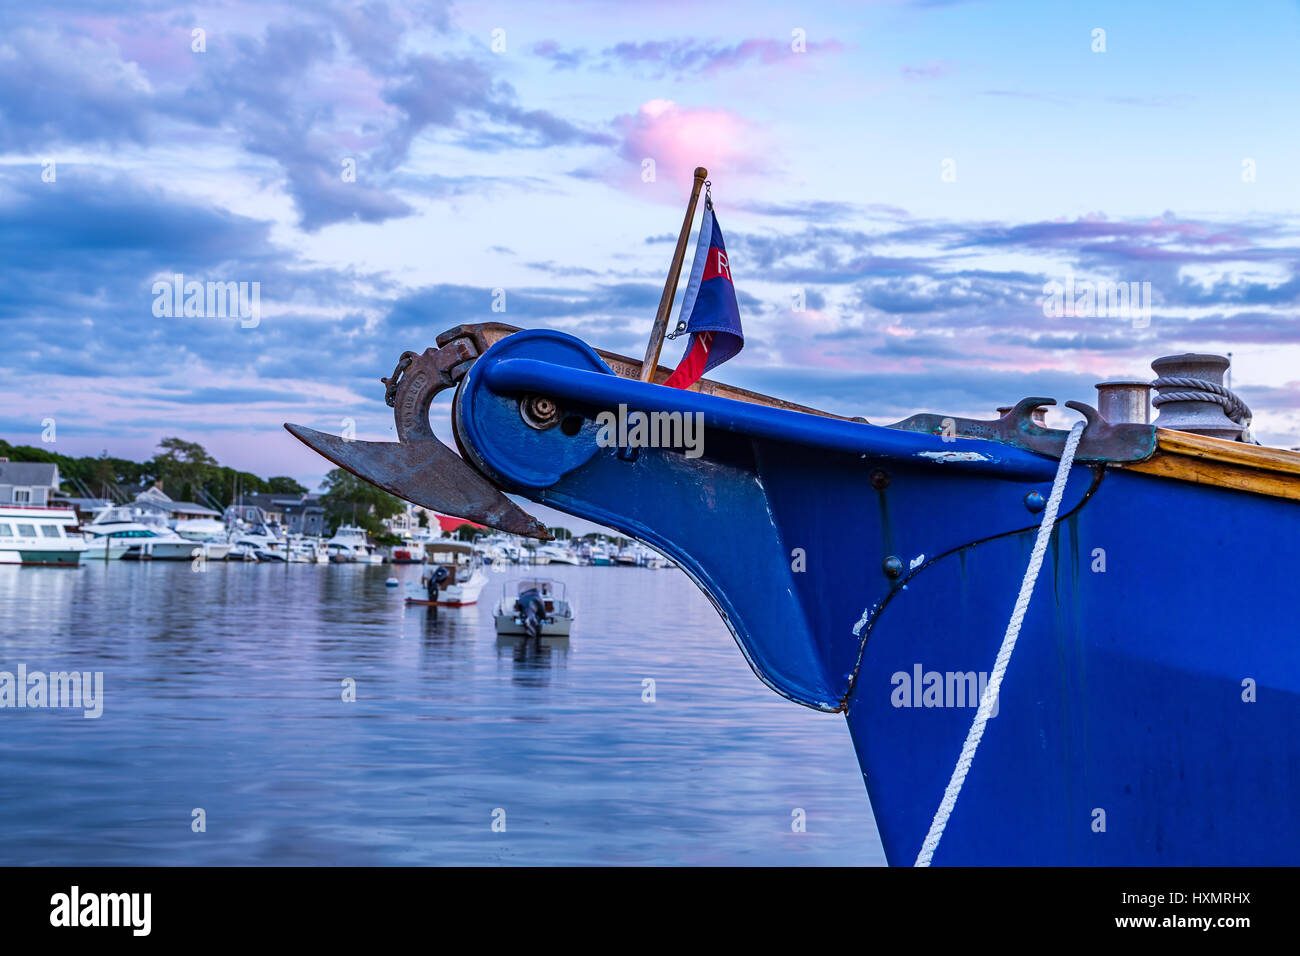 A boat anchor on a boat moored in Falmouth Harbor on Cape Cod, Massachusetts. Stock Photo